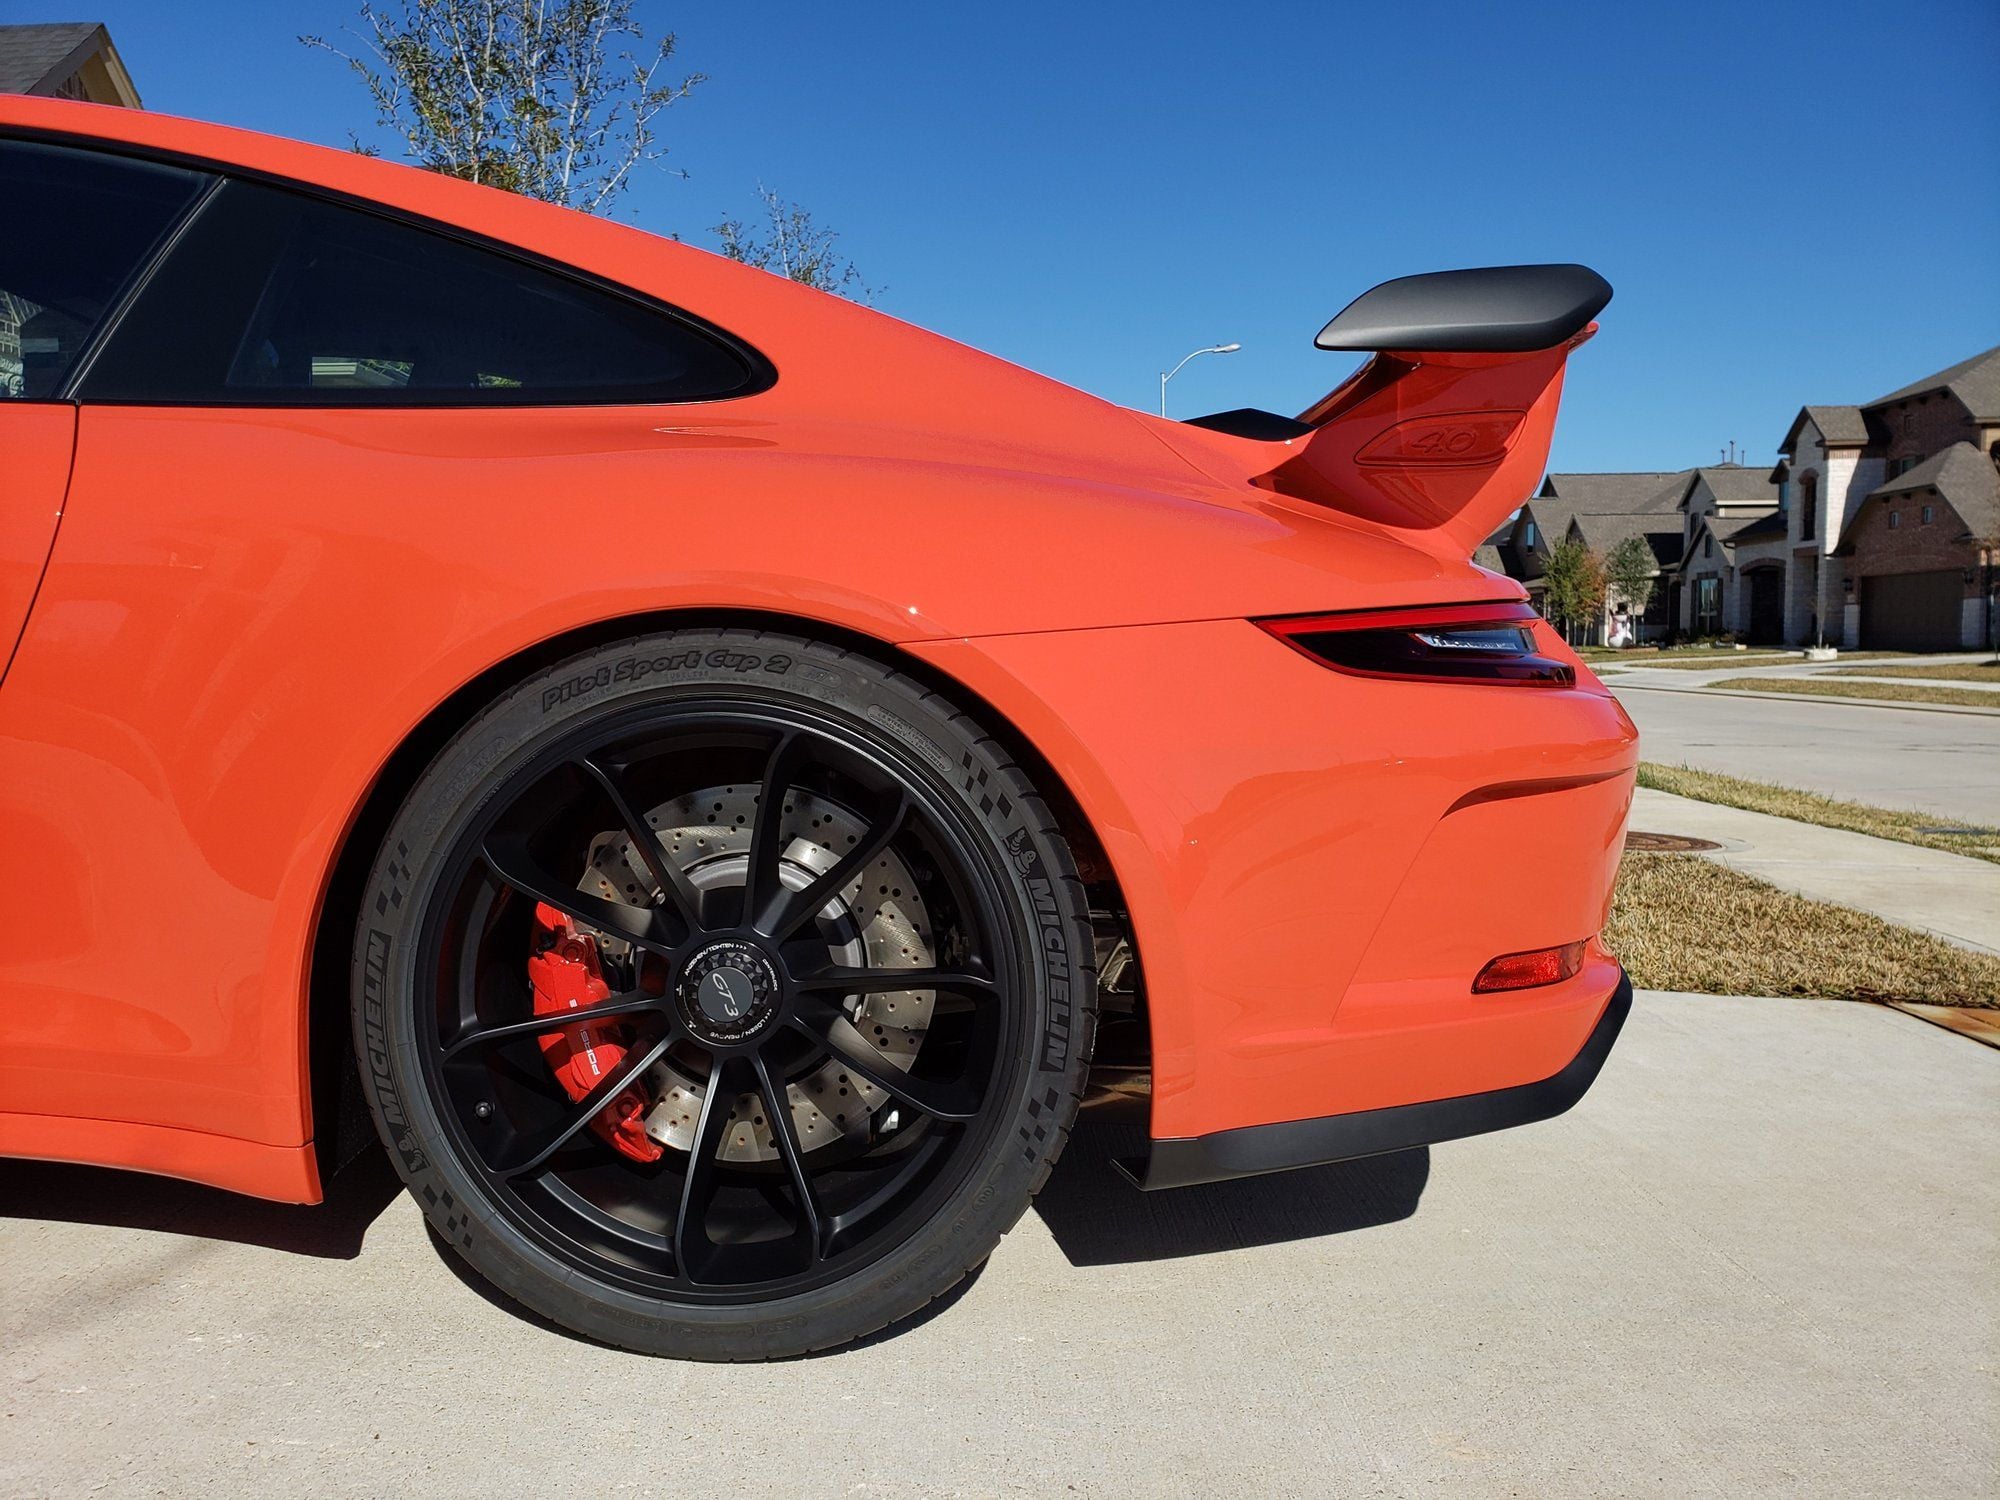 2018 Porsche 911 - F.S: 2018 Porsche 911 GT3 6MT Lava/Black w/only 680 Miles In Stunning Condition. - Used - VIN WP0AC2A9XJS176192 - 680 Miles - 6 cyl - 4WD - Automatic - Coupe - Orange - Scottsdale, AZ 85250, United States